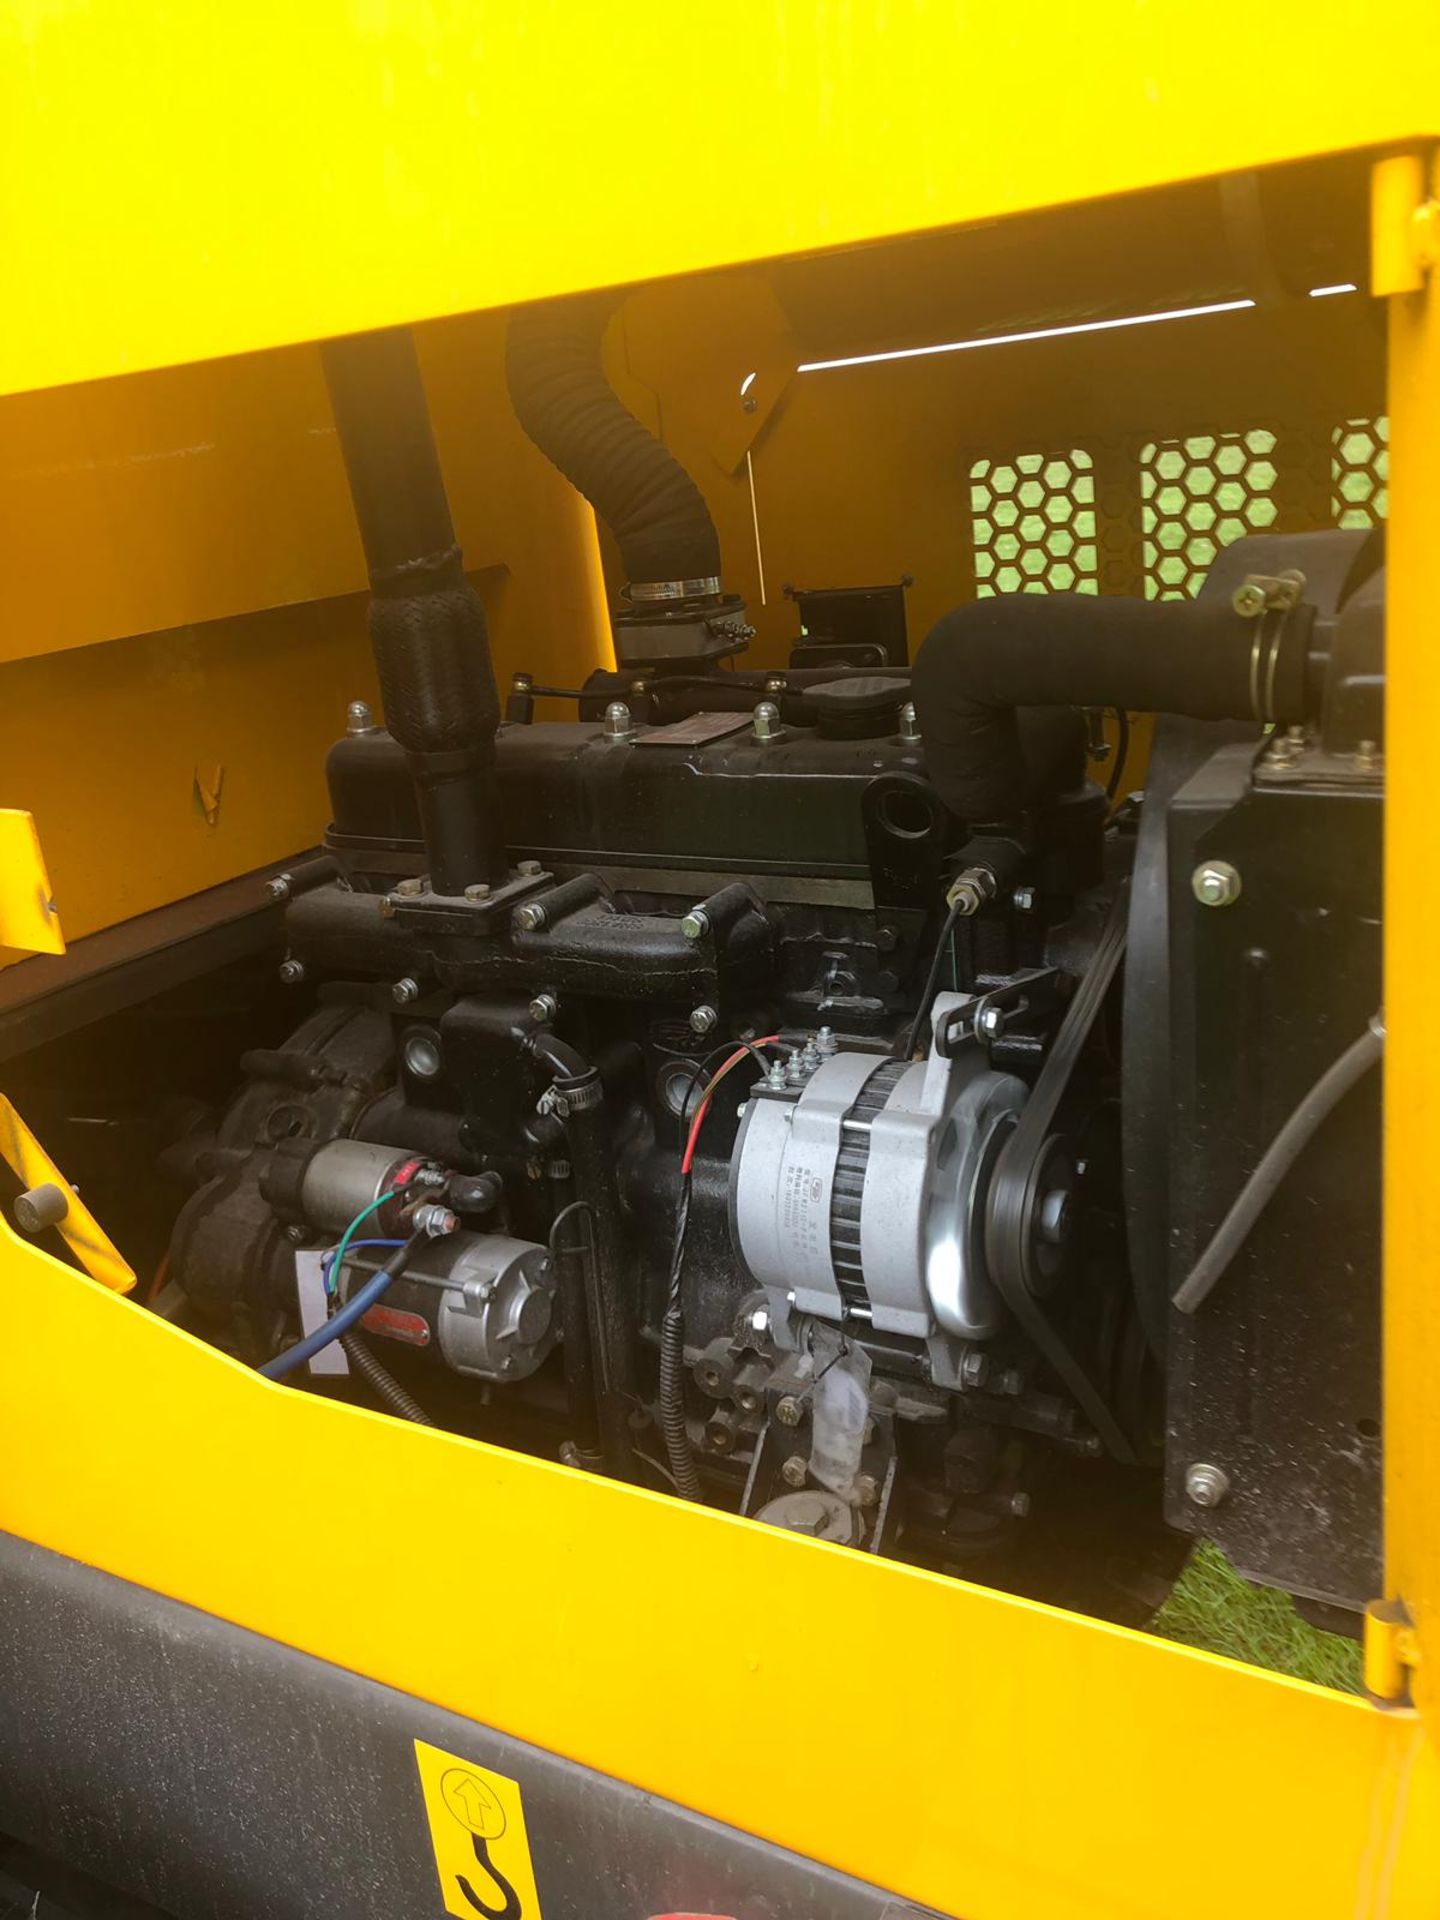 2019 BRAND NEW AND UNUSED ATTACK 1610 WHEEL LOADER, RUNS WORKS AND LIFTS *PLUS VAT* - Image 8 of 9